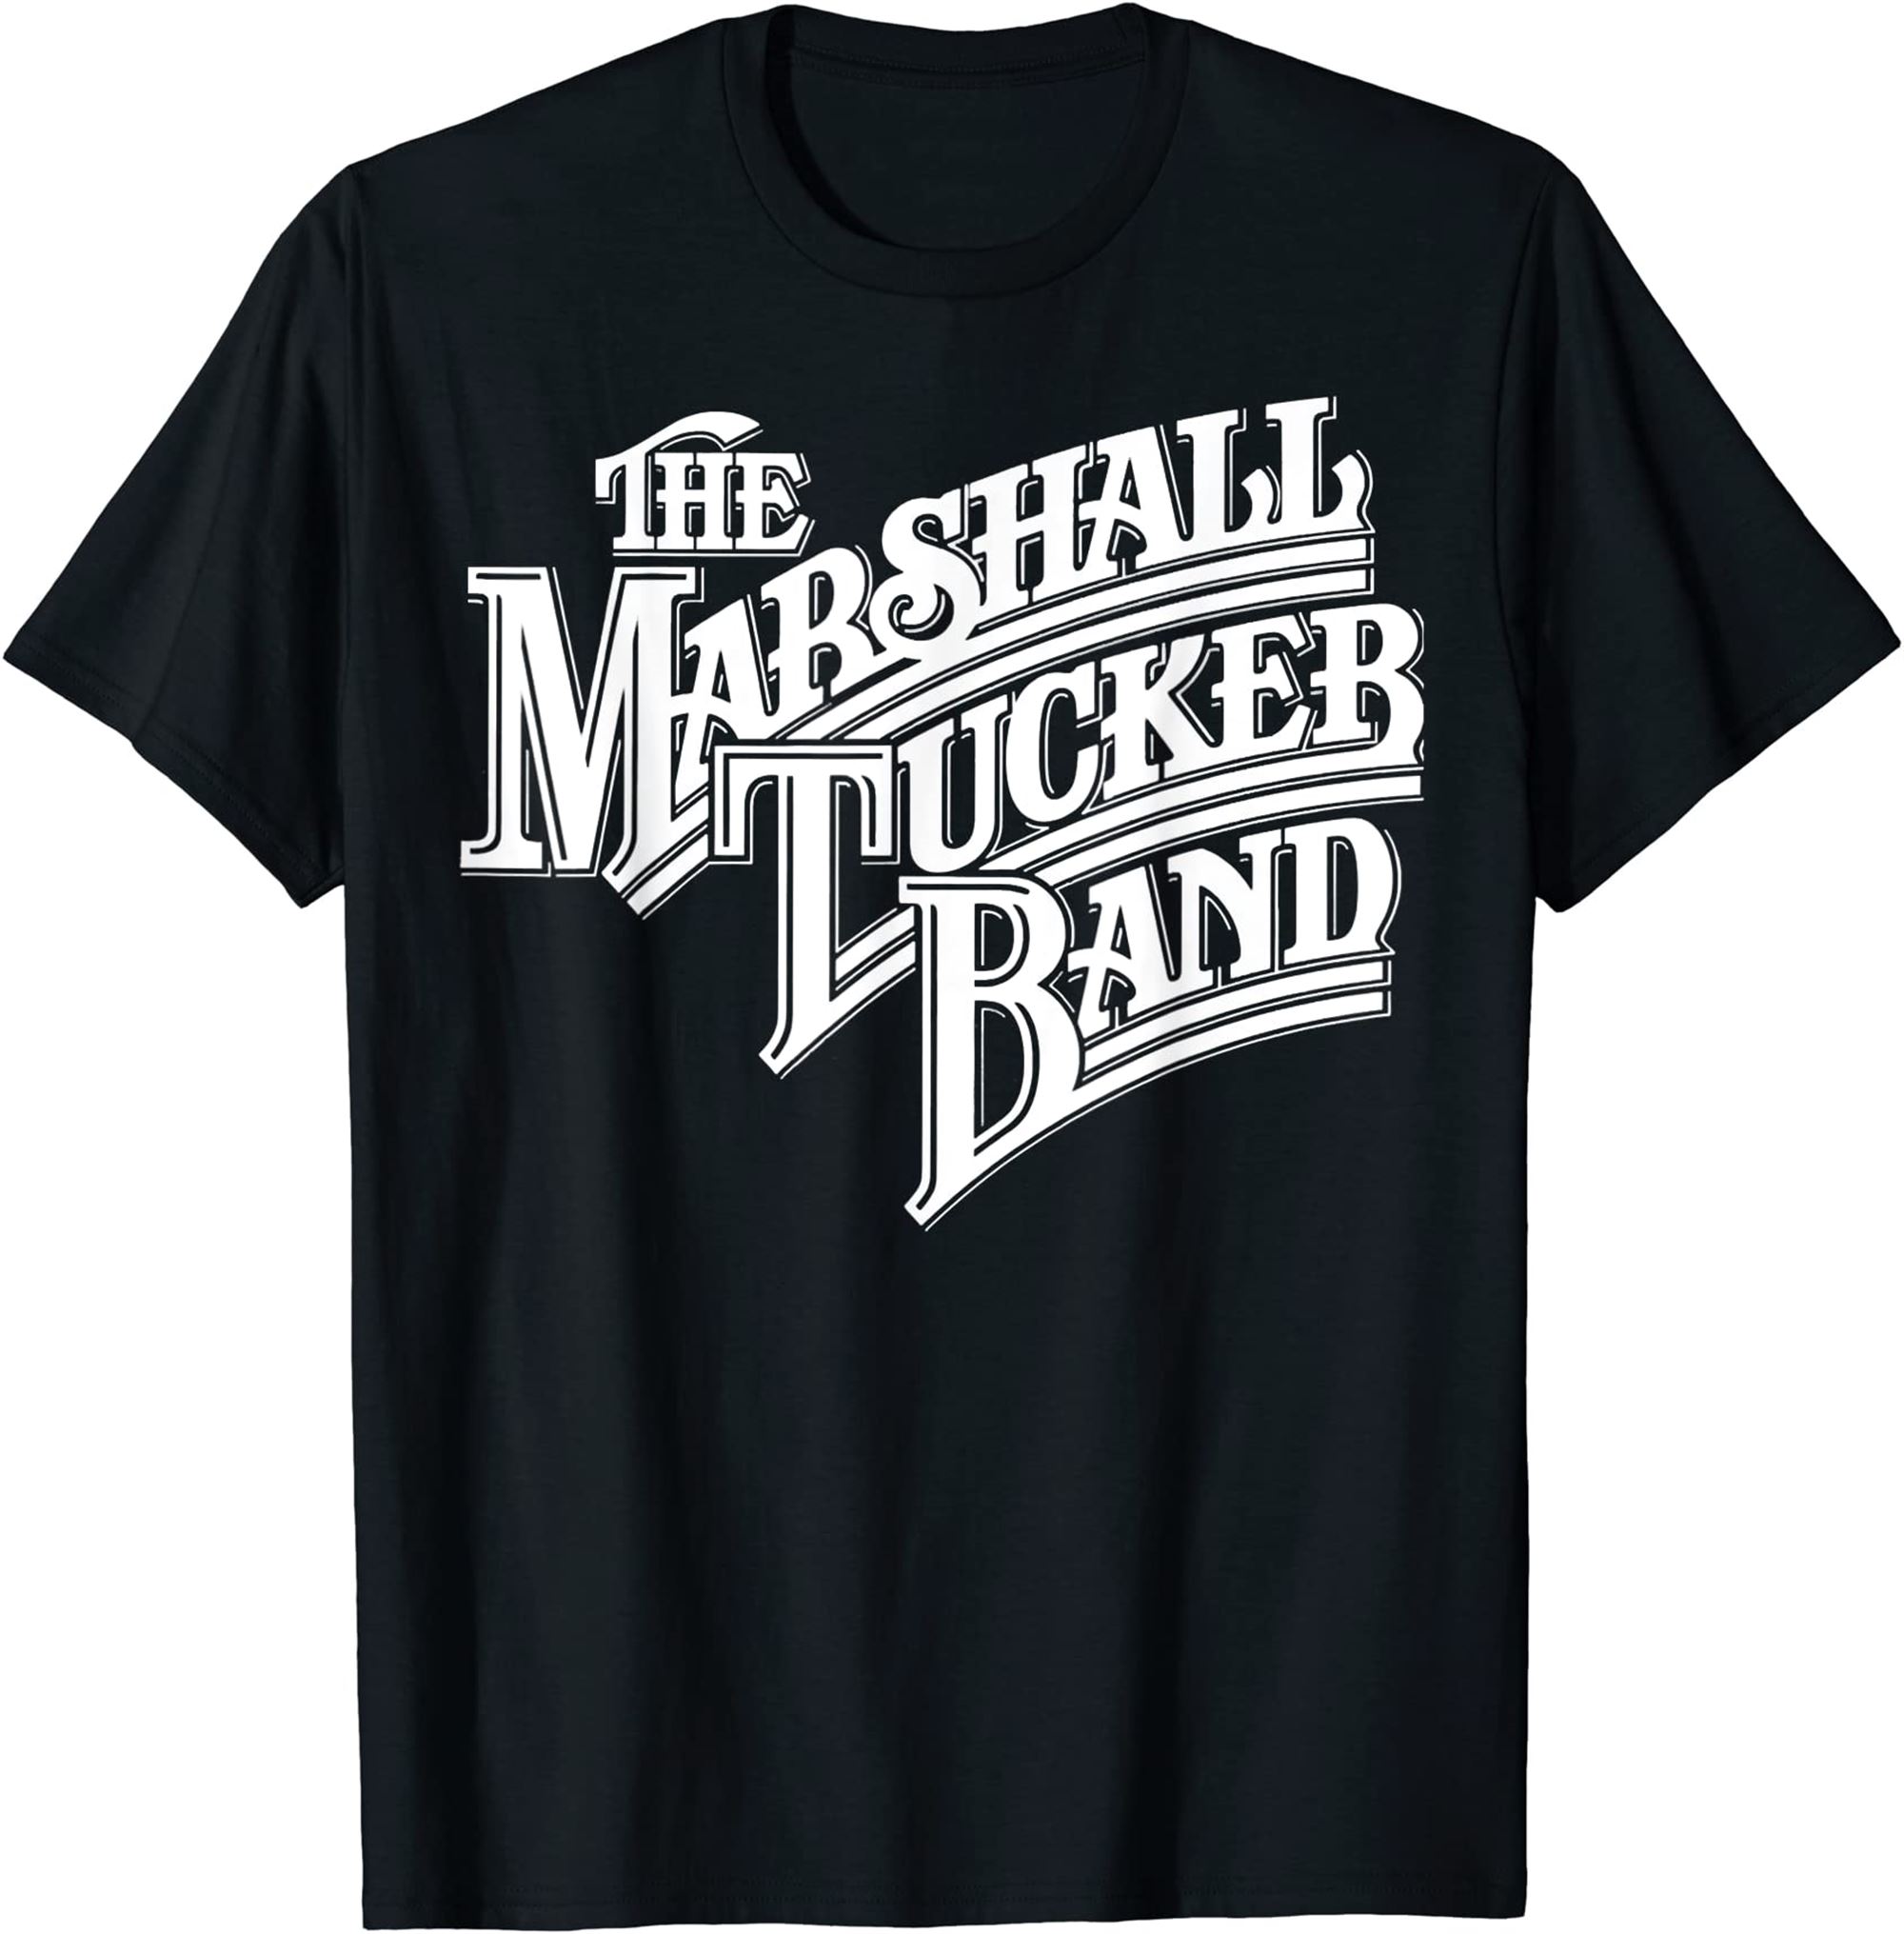 Marshall Tuckers Band T-shirt Full Size Up To 5xl